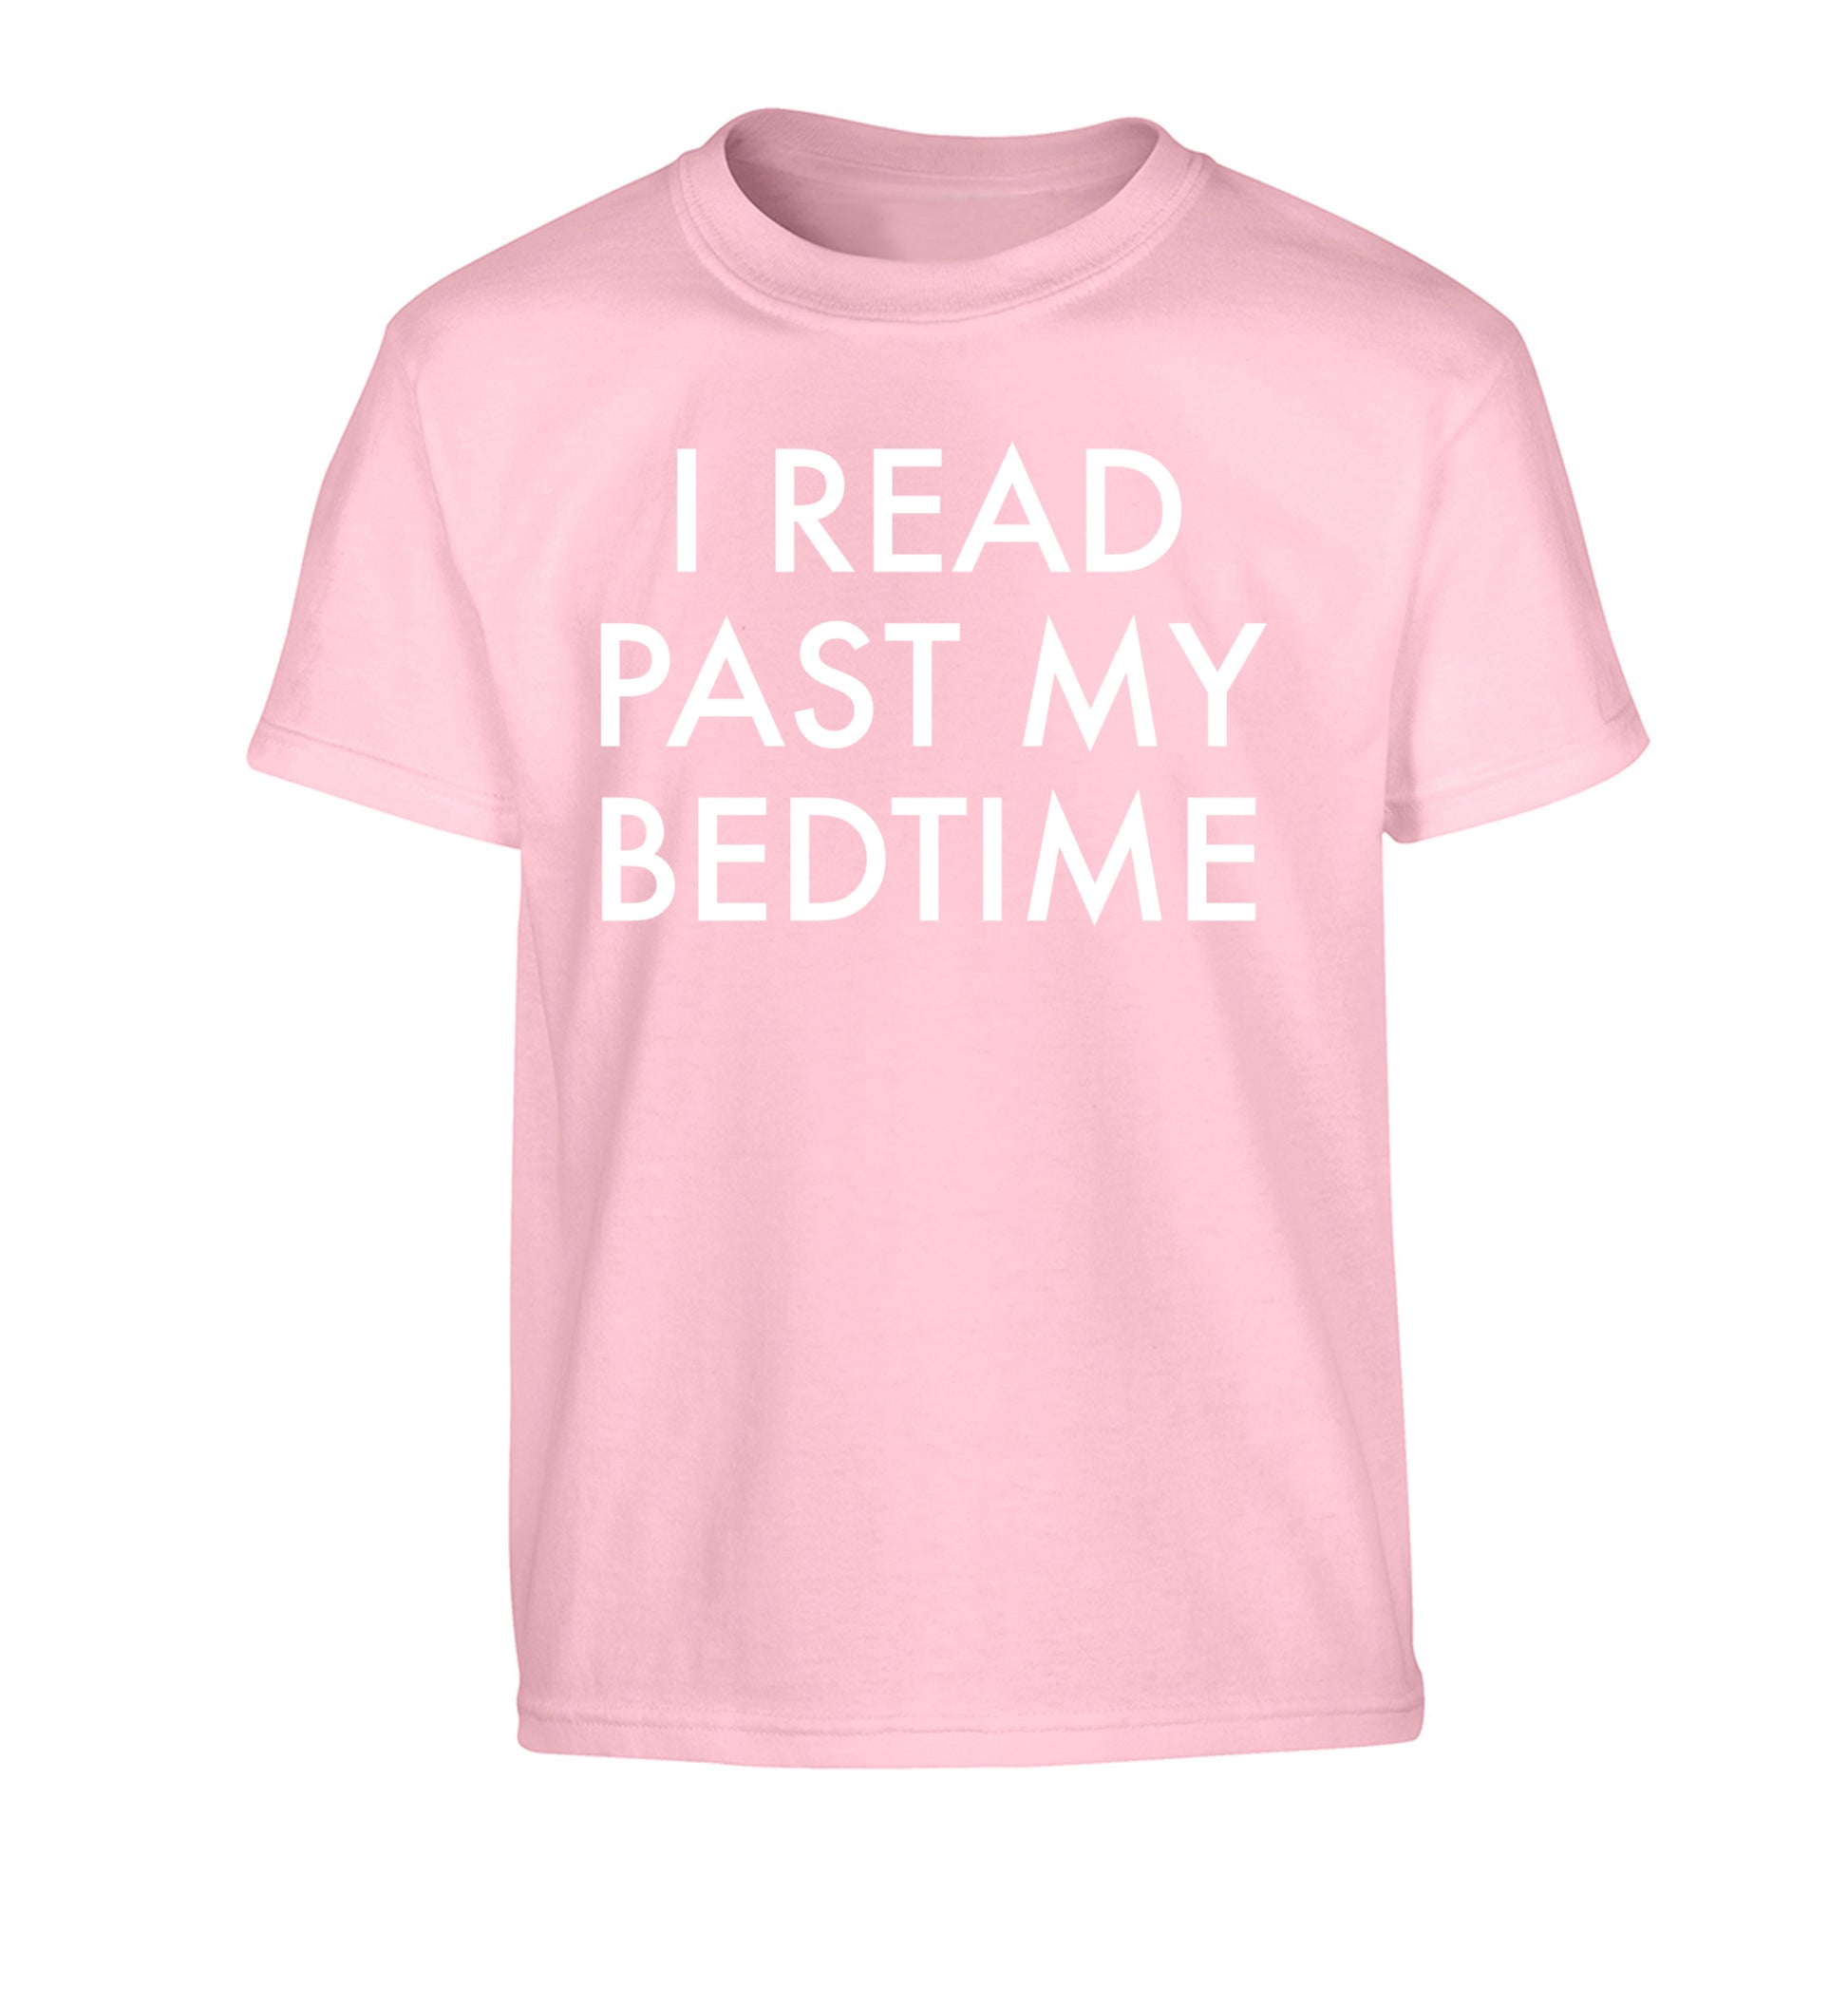 I read past my bedtime Children's light pink Tshirt 12-14 Years